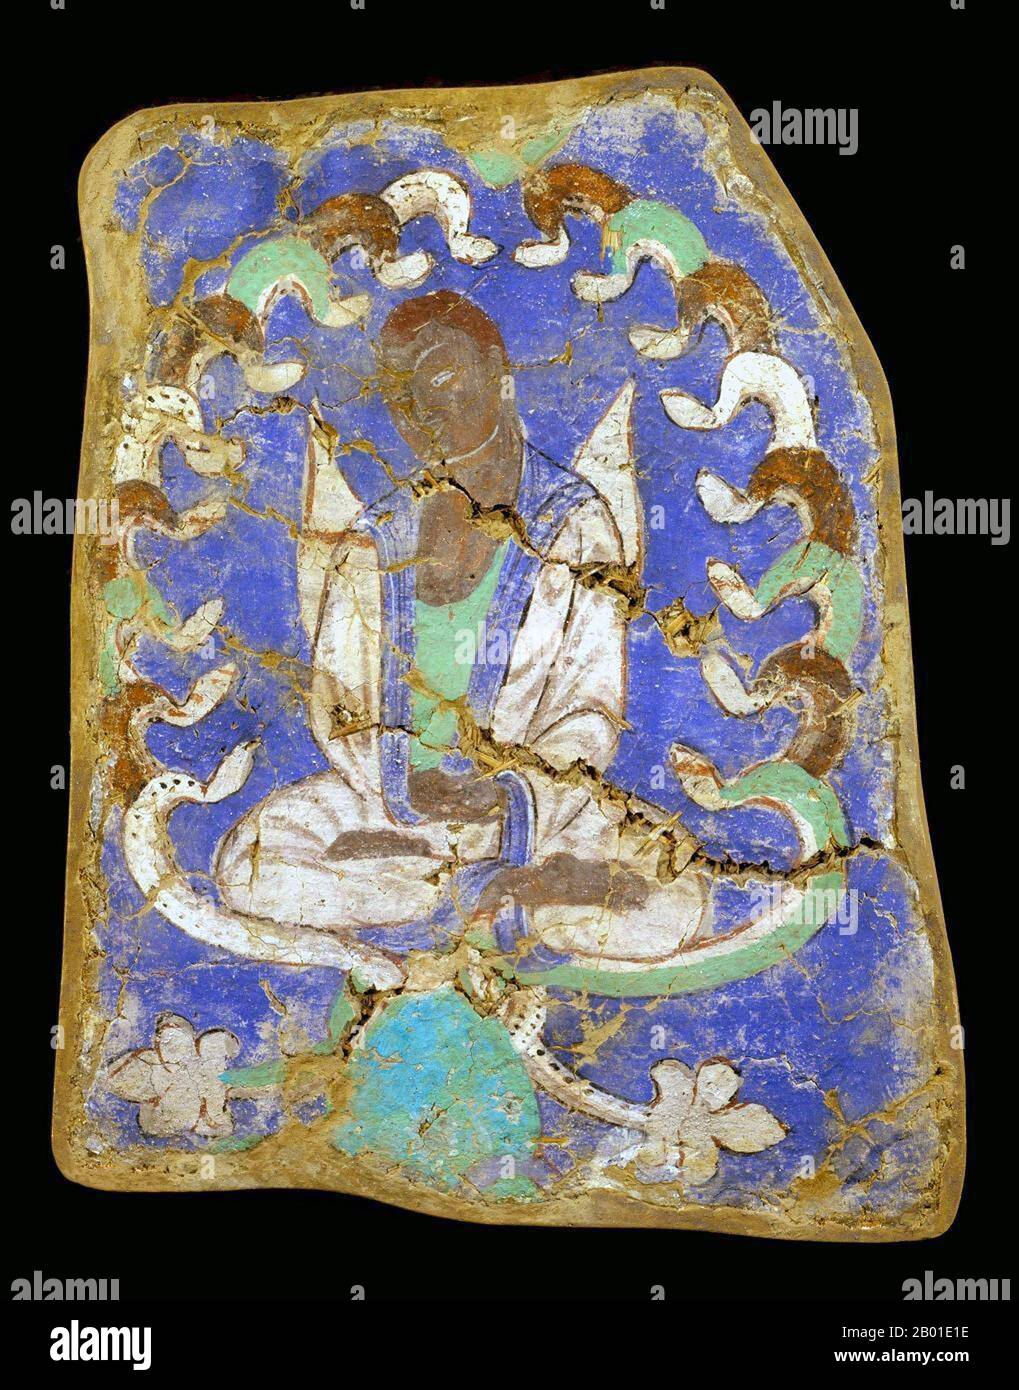 China: Monk Ajnatakaundiya in meditation. Mural from the Kizil Thousand Buddha Caves, Xinjiang, c. 5th-6th century CE.  The Kizil Caves (also romanized Qizil Caves, spelling variant Qyzyl; Uyghur: Qizil Ming Öy; Chinese: 克孜尔千佛洞; pinyin: Kèzīěr Qiānfú Dòng; literally 'Kizil Cave of a Thousand Buddhas') are a set of 236 Buddhist rock-cut caves located near Kizil Township (克孜尔乡) in Baicheng County, Xinjiang, China. The site is located on the northern bank of the Muzat River 75 kilometres (by road) northwest of Kucha. This area was a commercial hub of the The Silk Road. Stock Photo